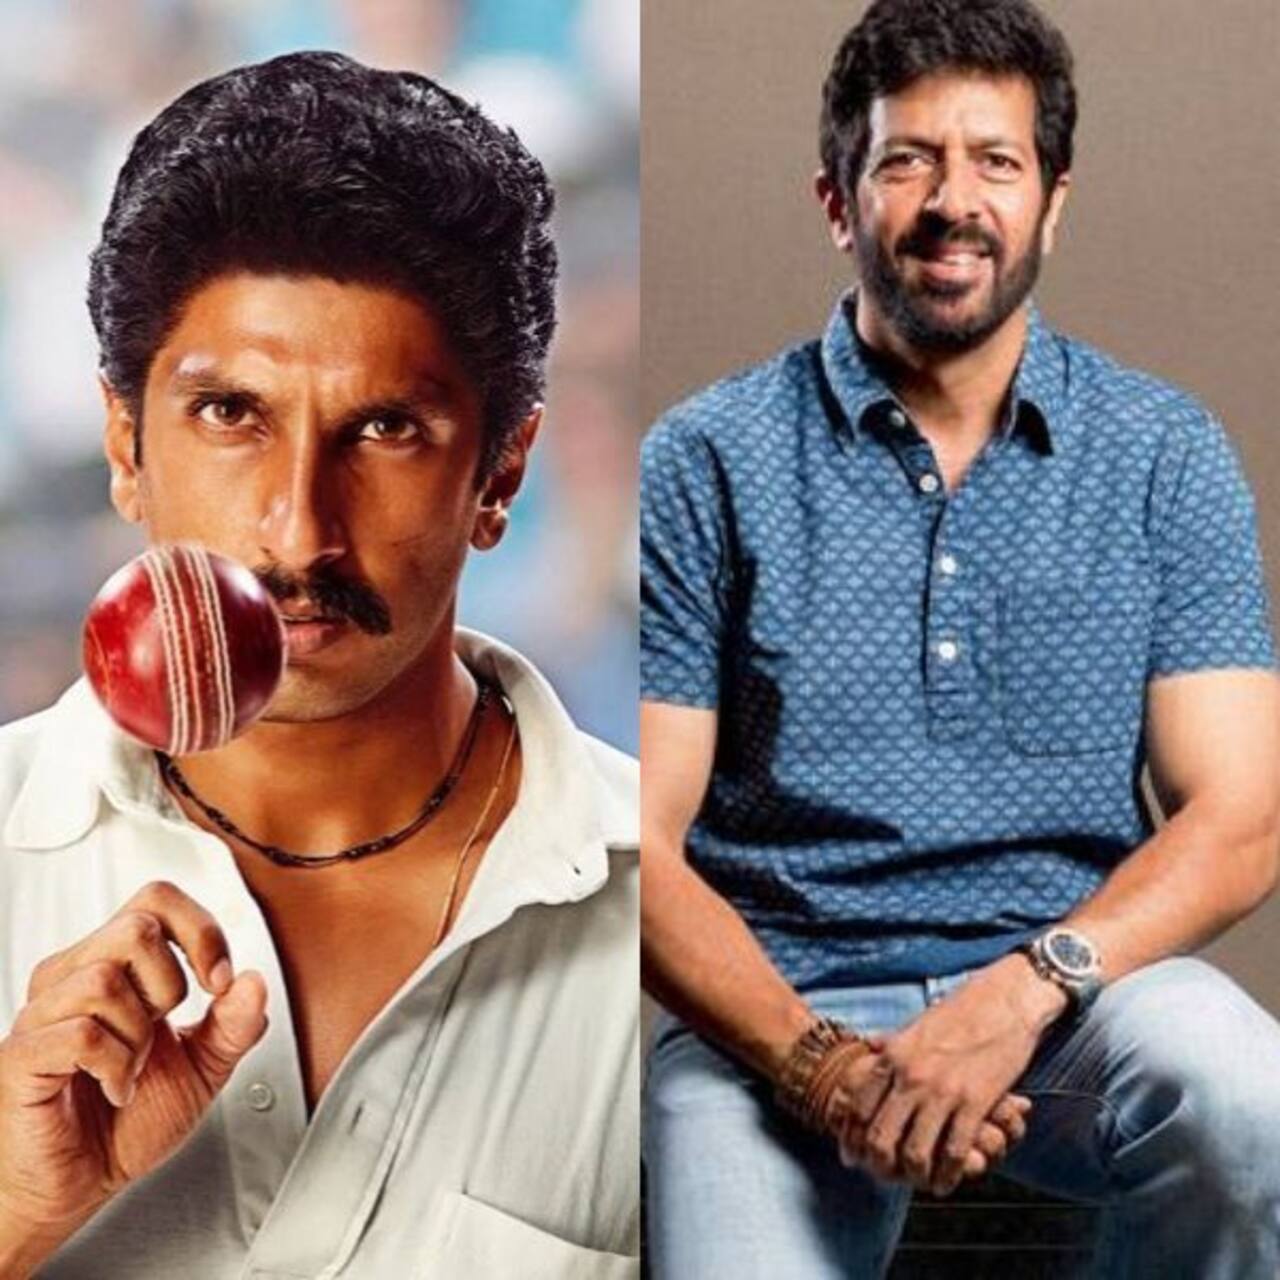 83: 'Ranveer is one of those gifted people who can turn into any character,' says director Kabir Khan